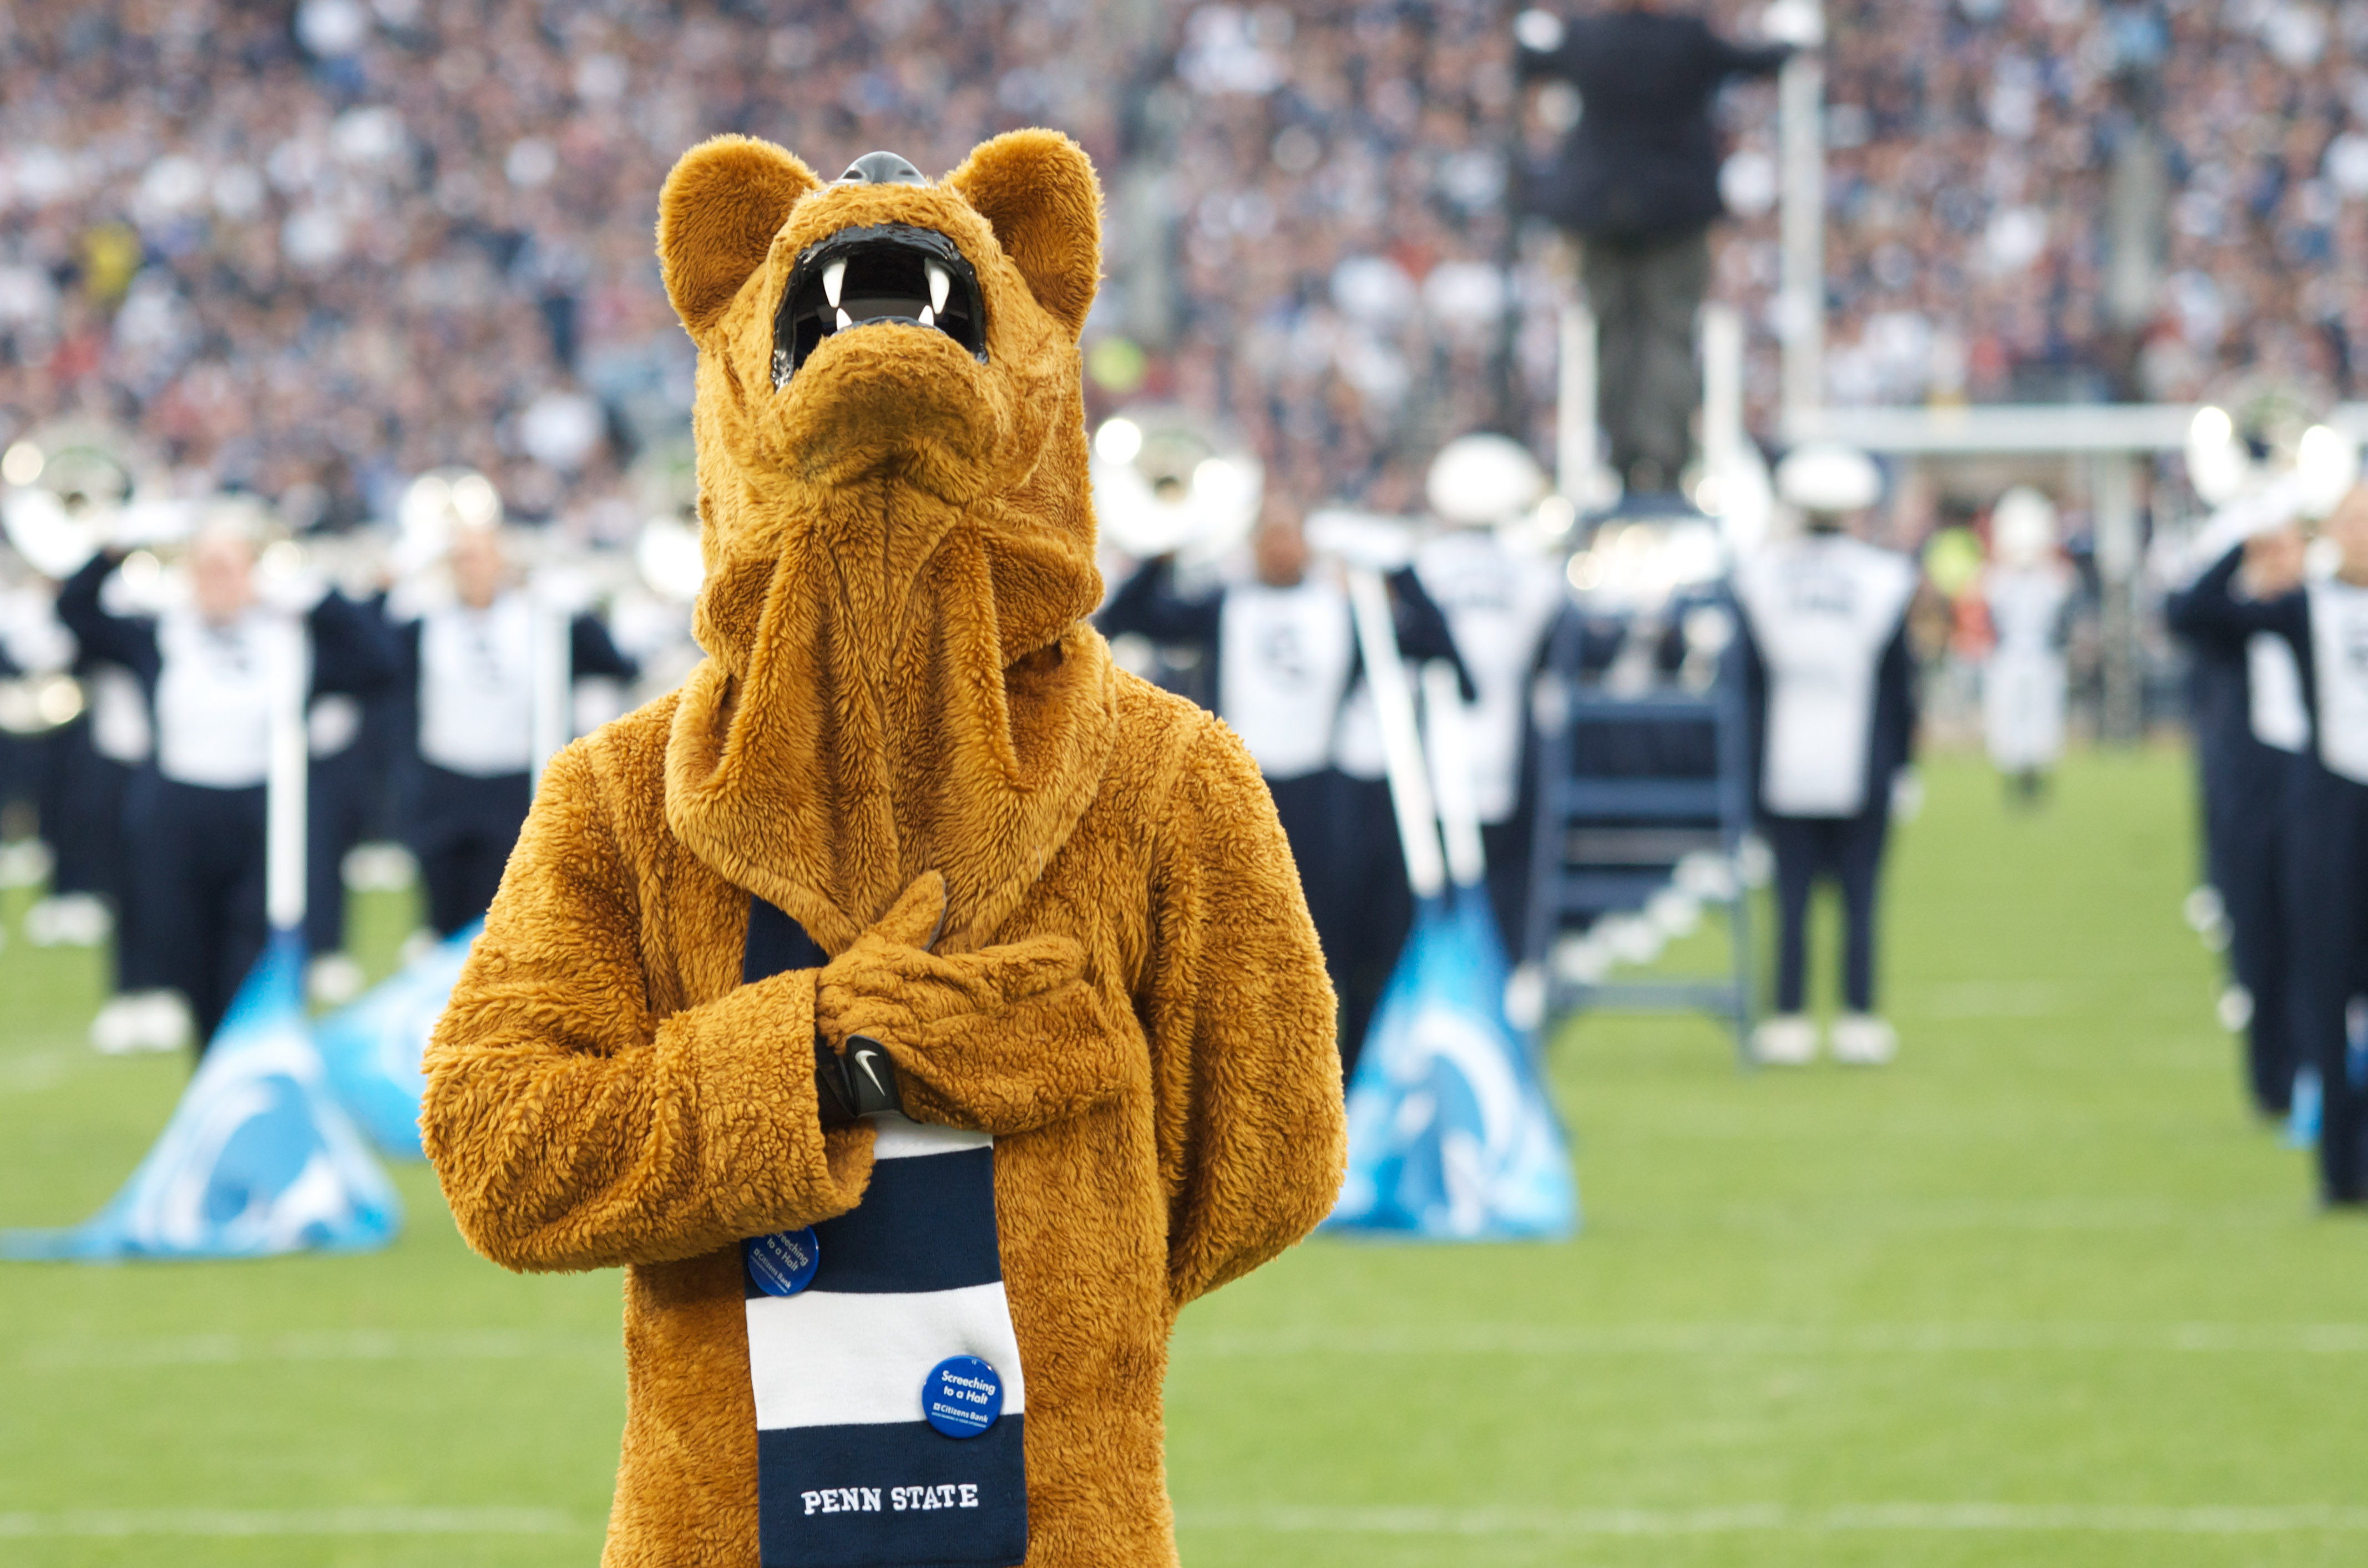 The Nittany Lion at All-University Day. Photo by Eric Weiss.